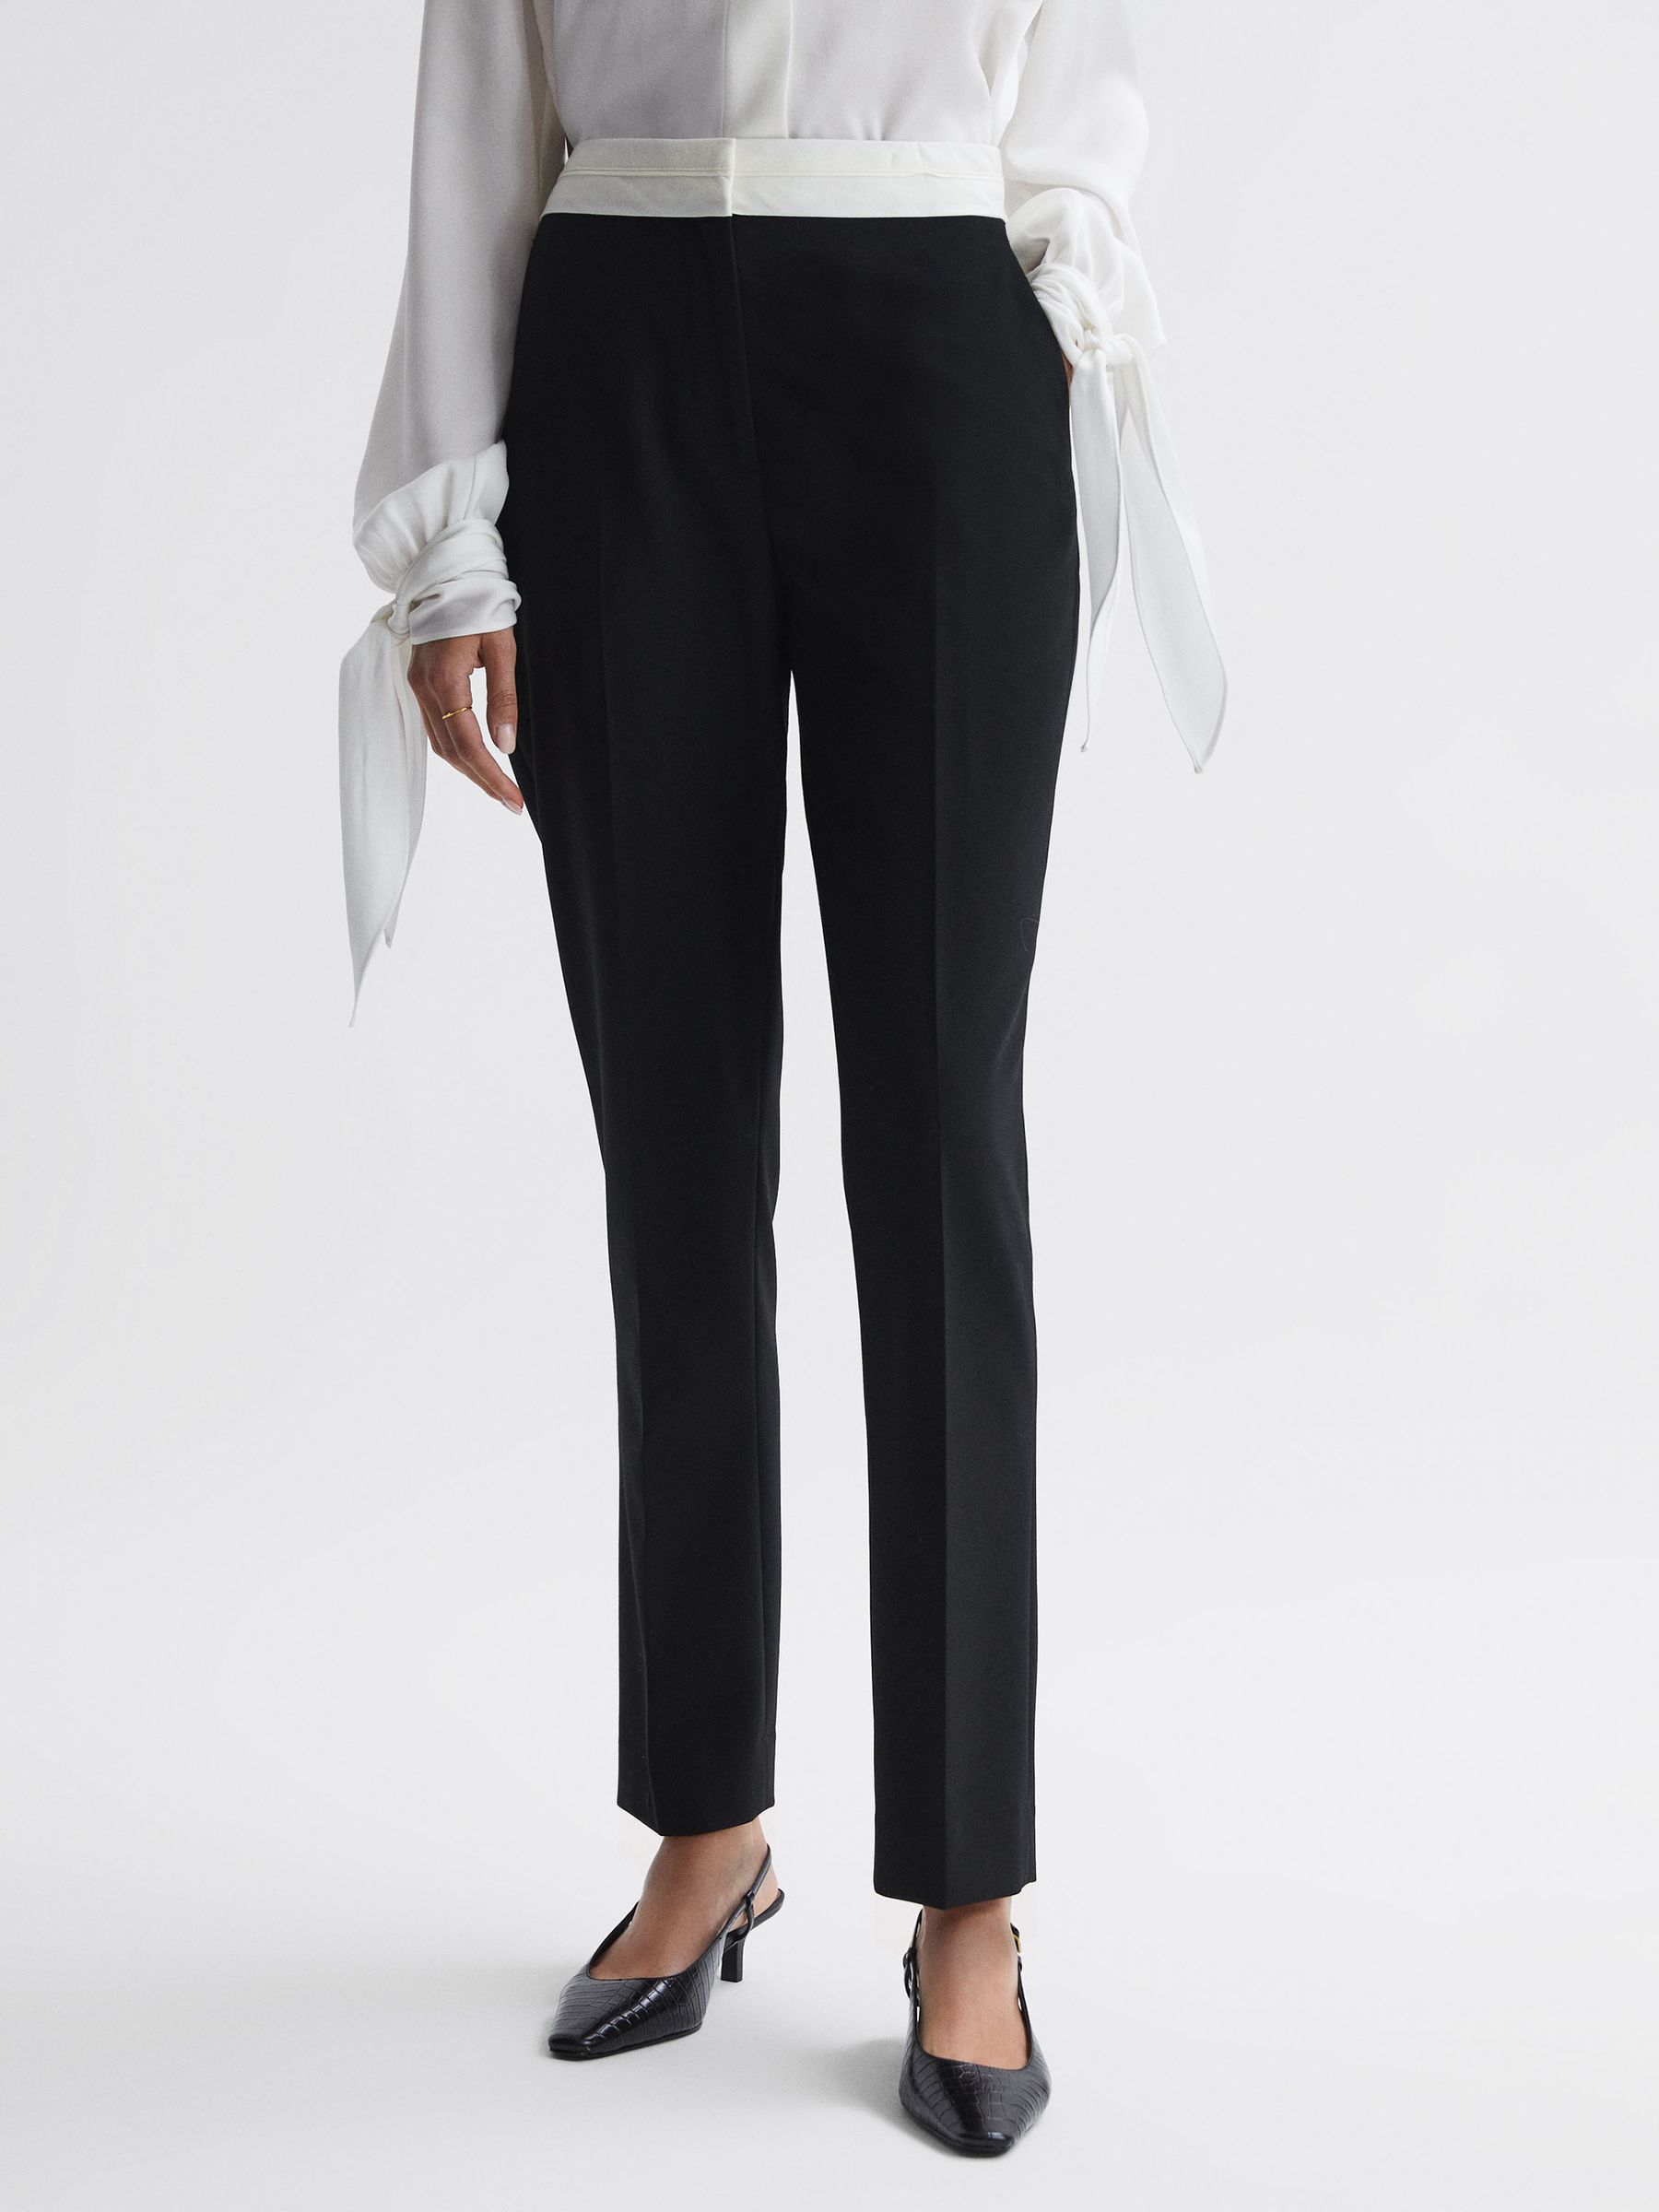 Reiss Olivia Tapered Contrast Waistband Trousers - REISS